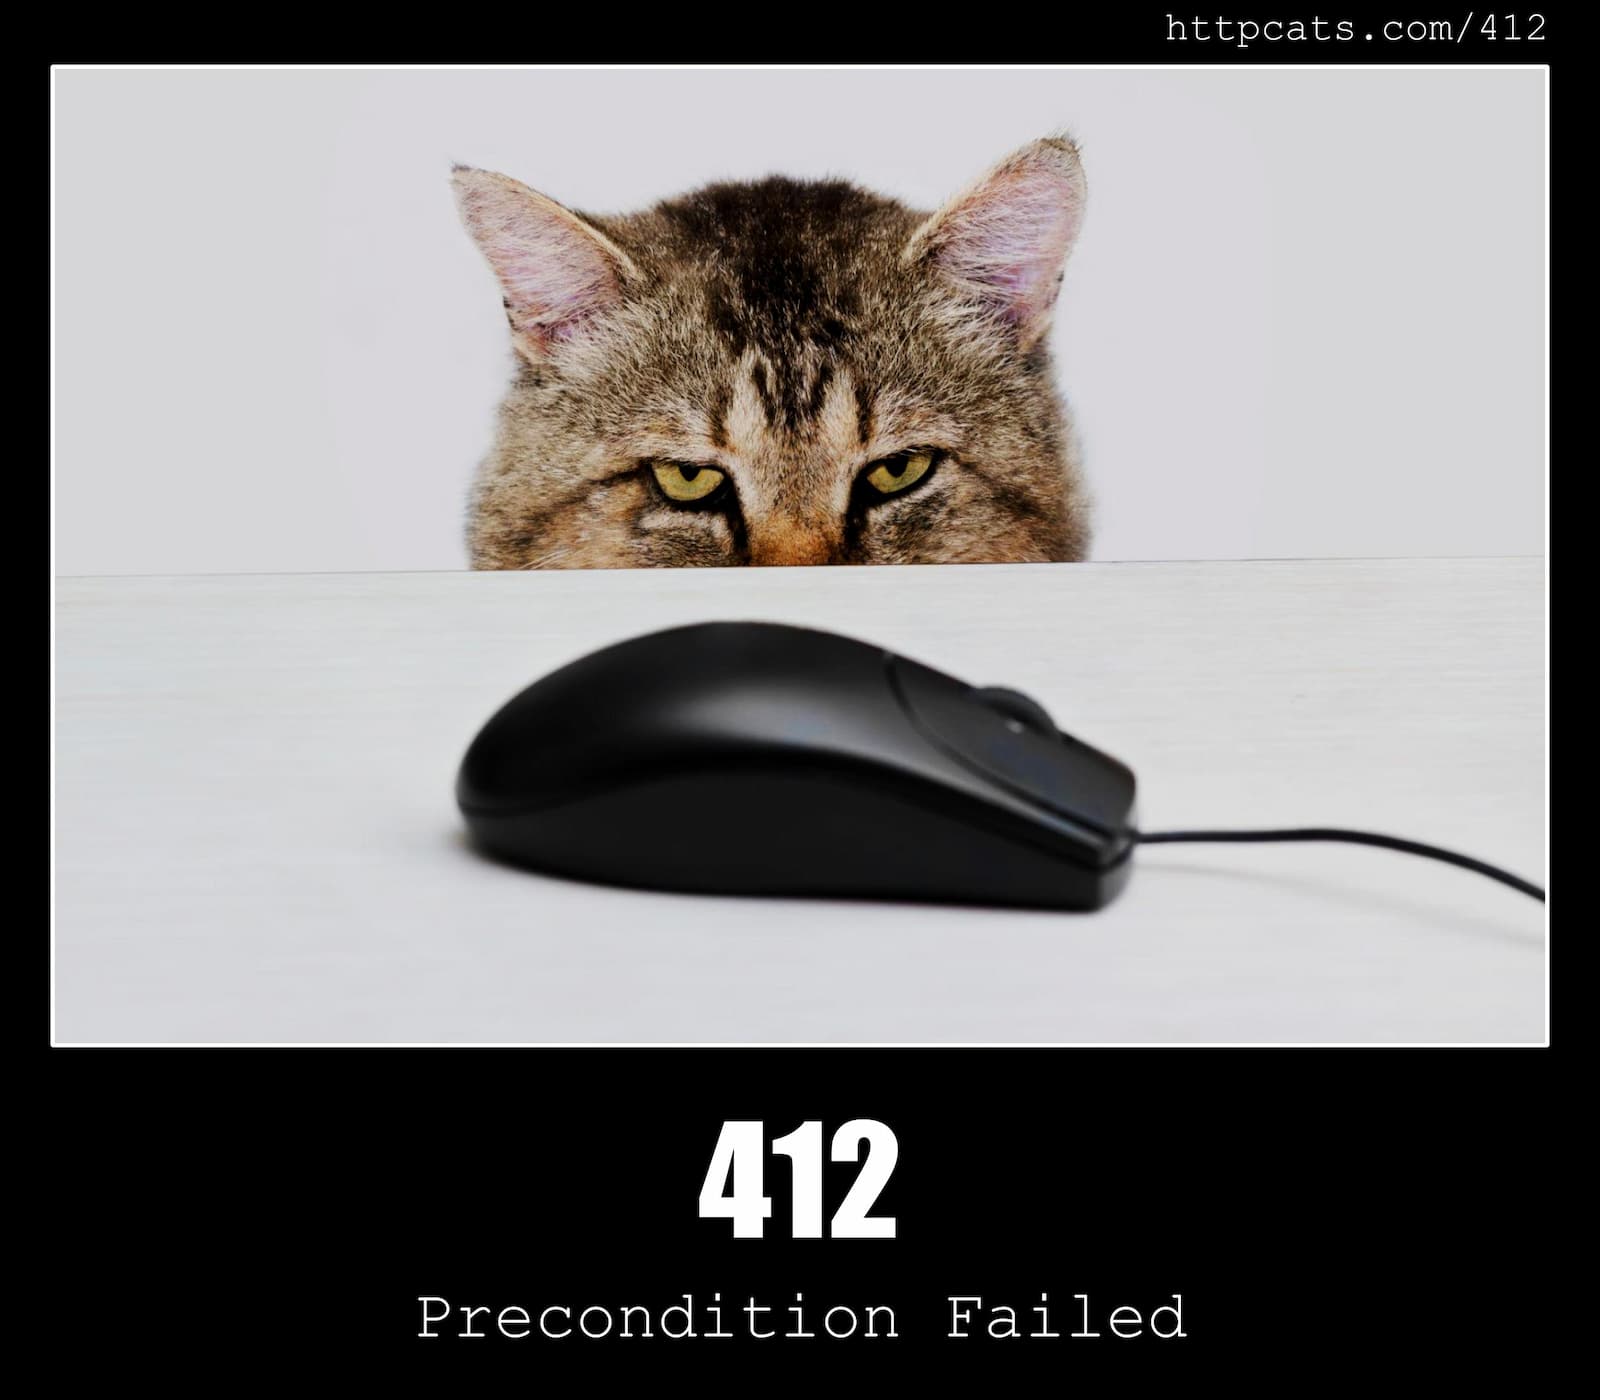 HTTP Status Code 412 Precondition Failed & Cats